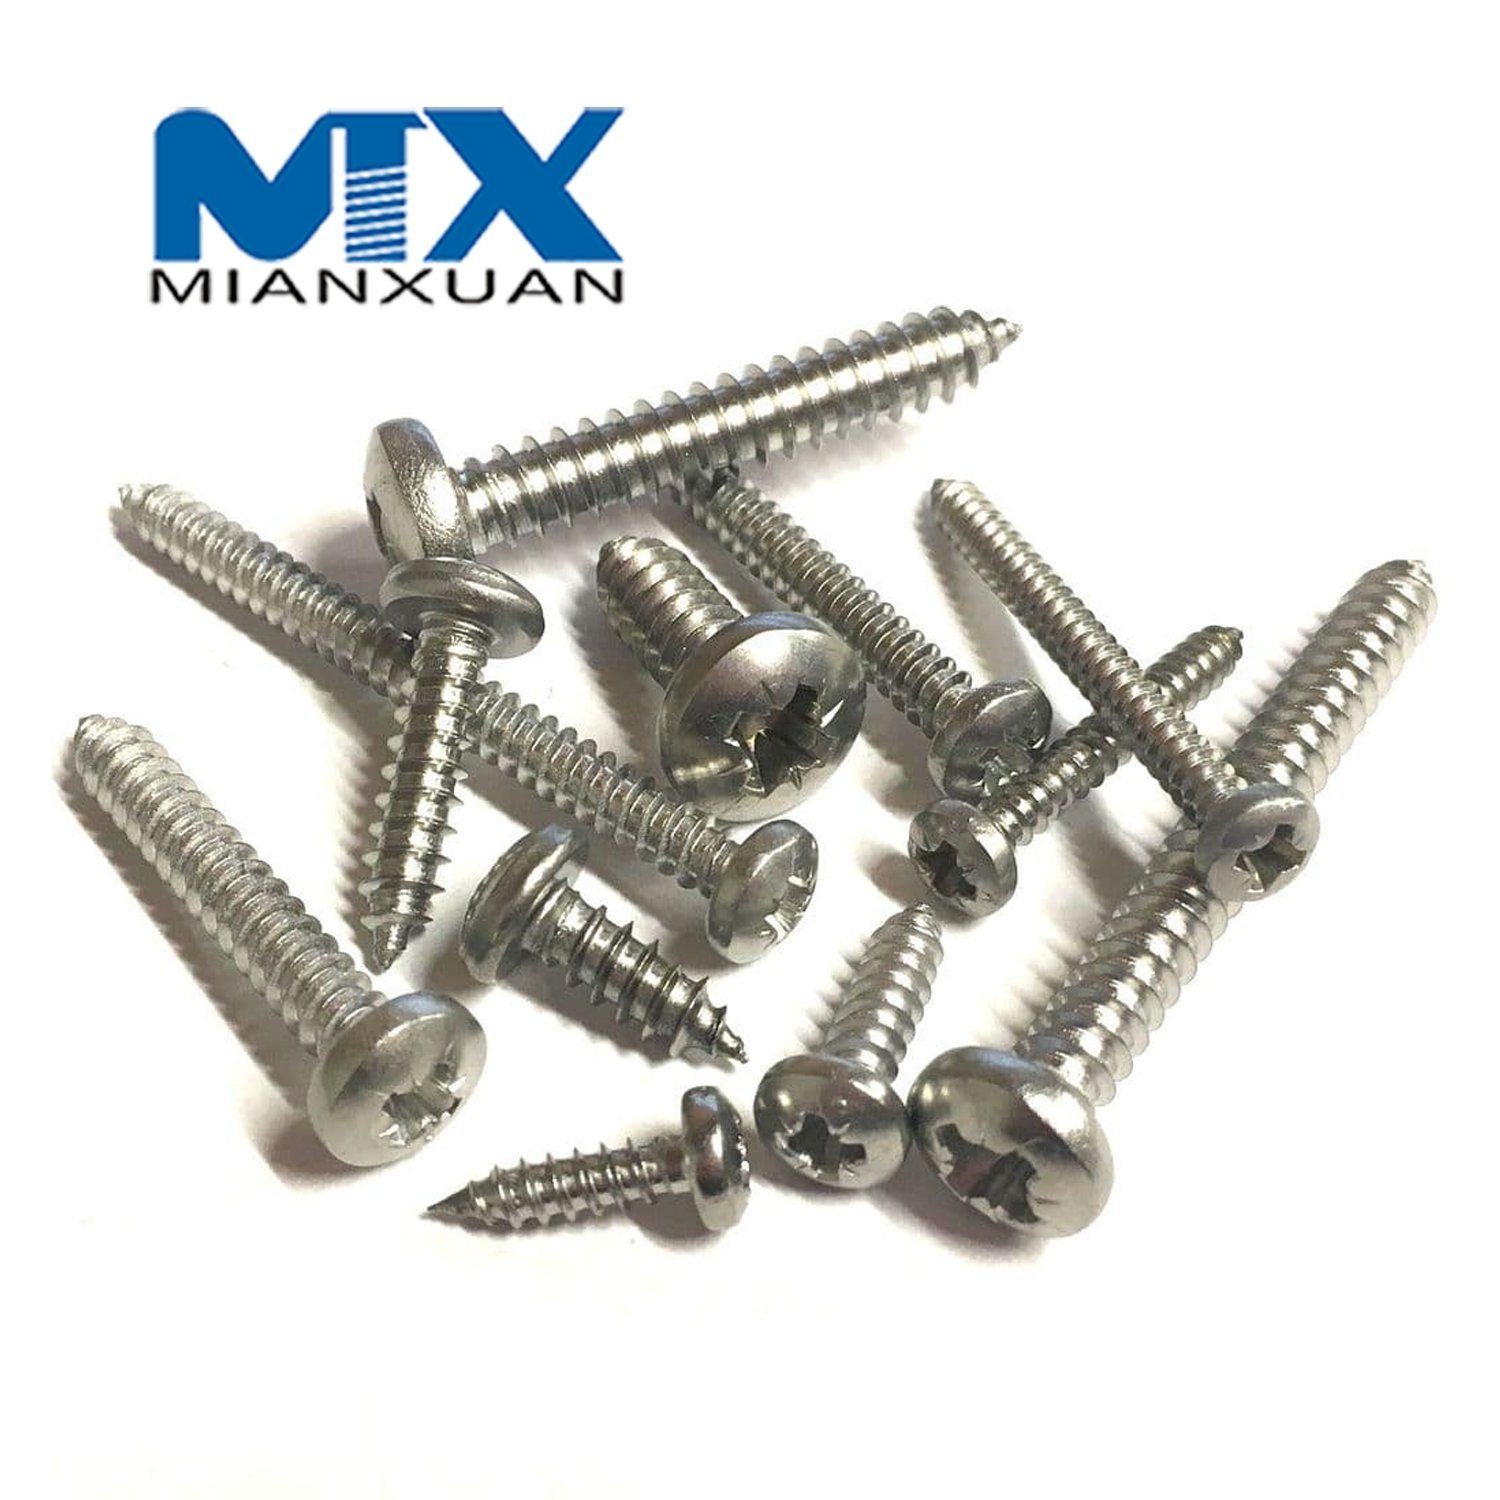 Yb845 Screw Stainless Steel Standard Manufacturer A2 A4 18-8